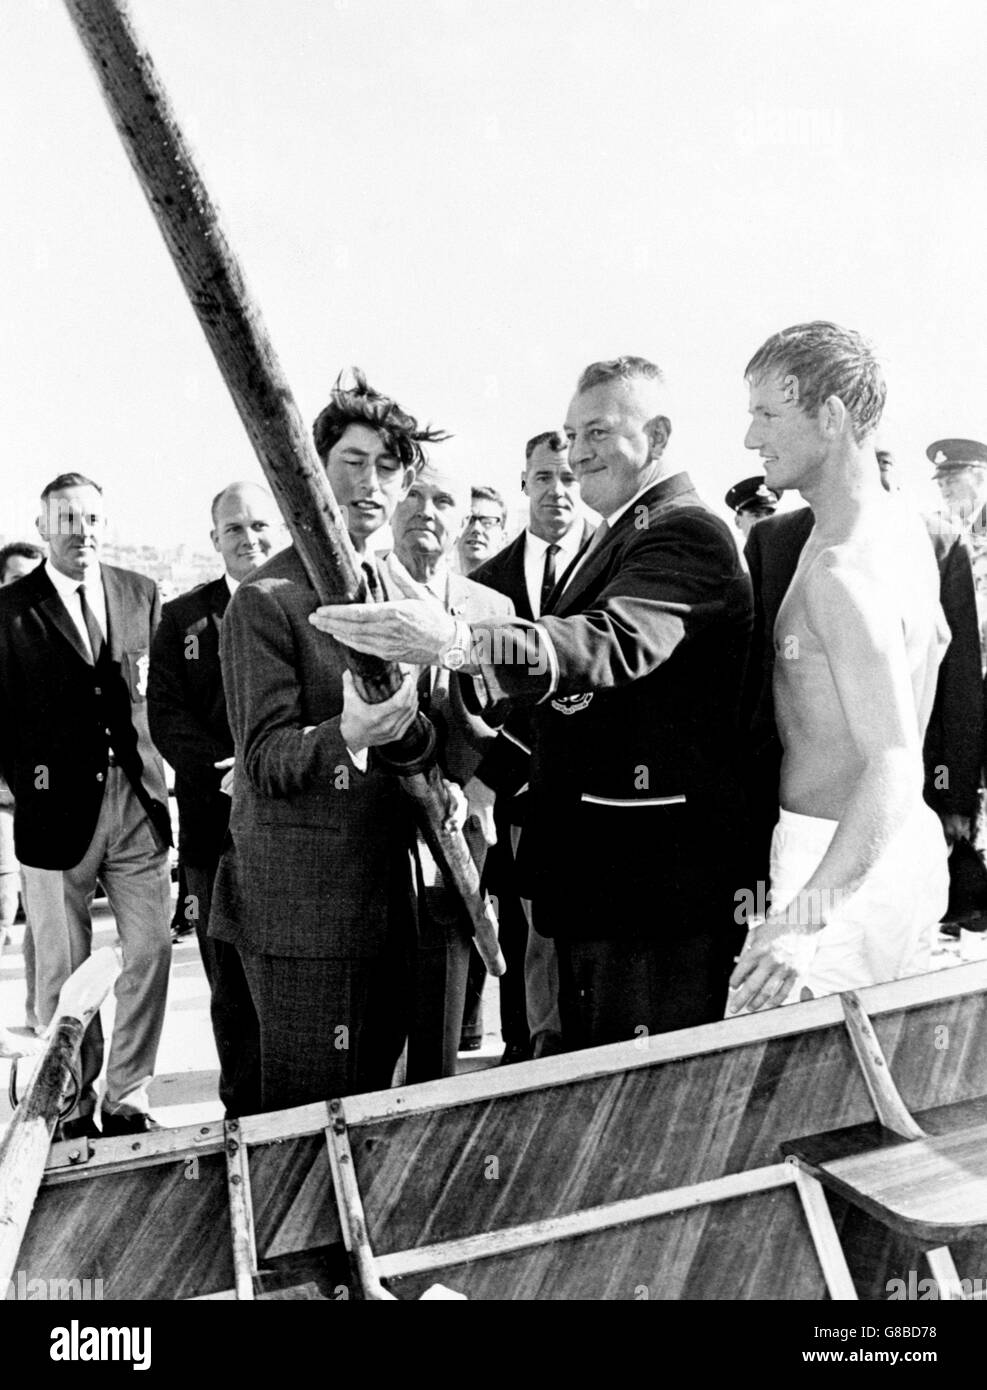 Royalty prince charles australia Black and White Stock Photos & Images ...